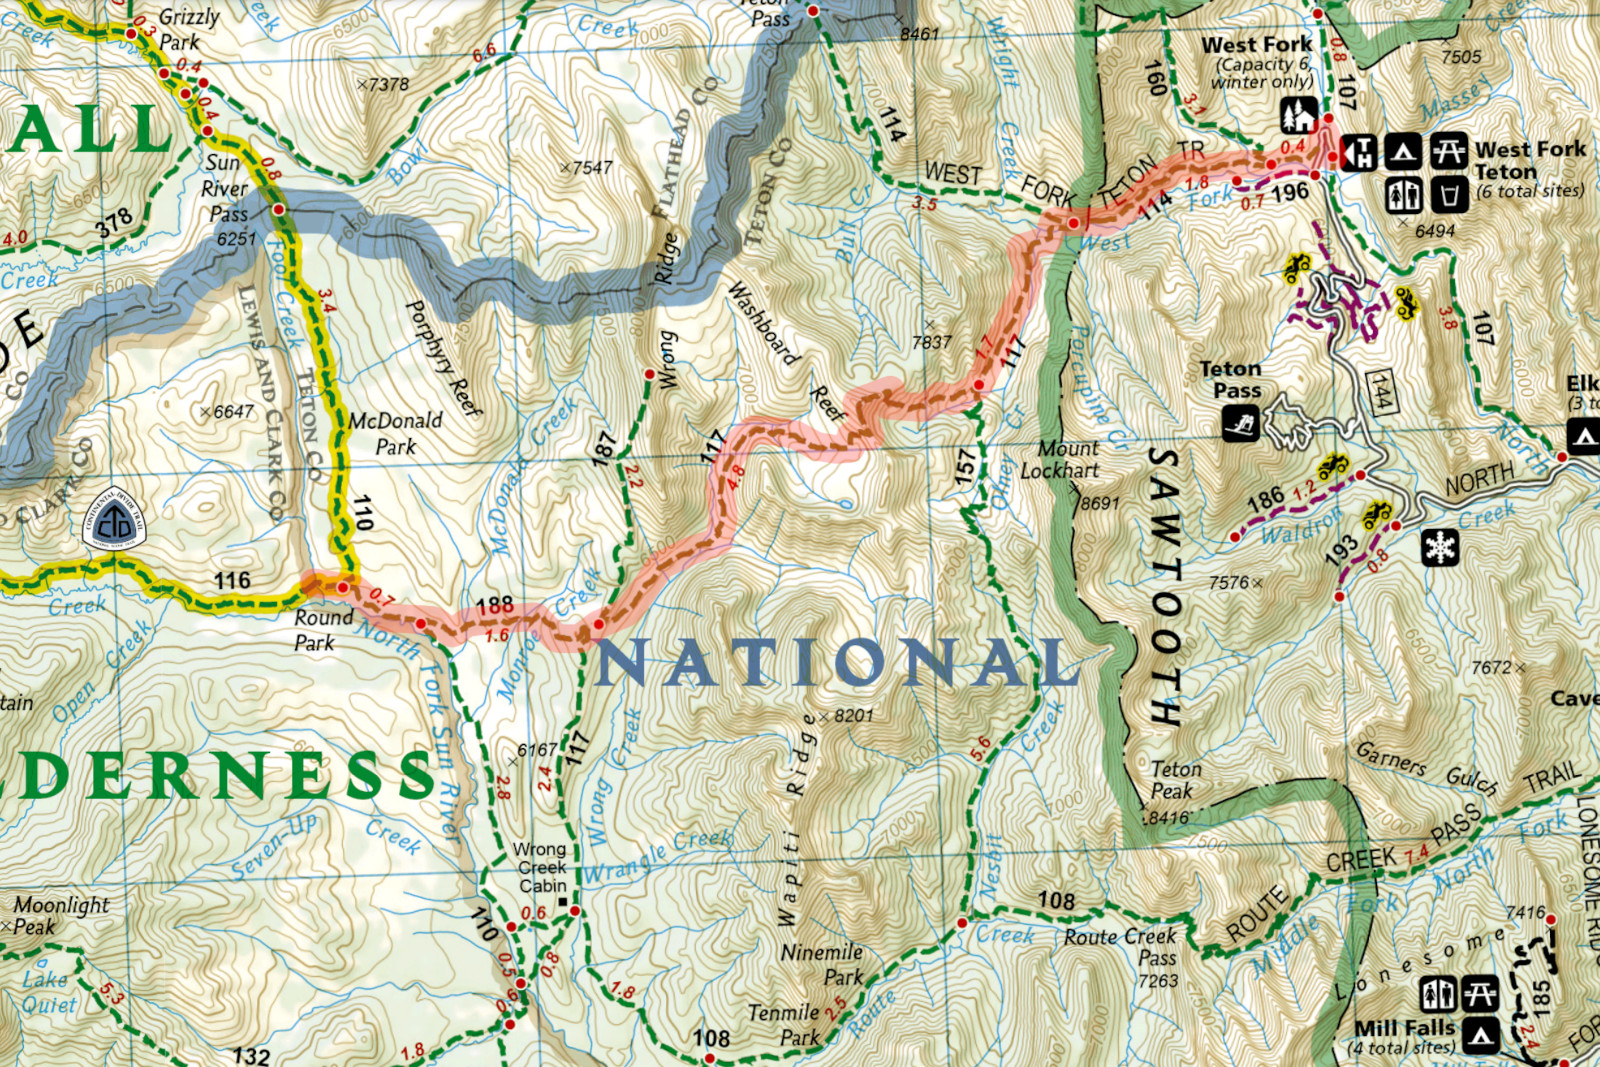 Map of 11.2-mile path (highlighted in red) from the West Fork Teton Trailhead to Fool Creek on the CDT